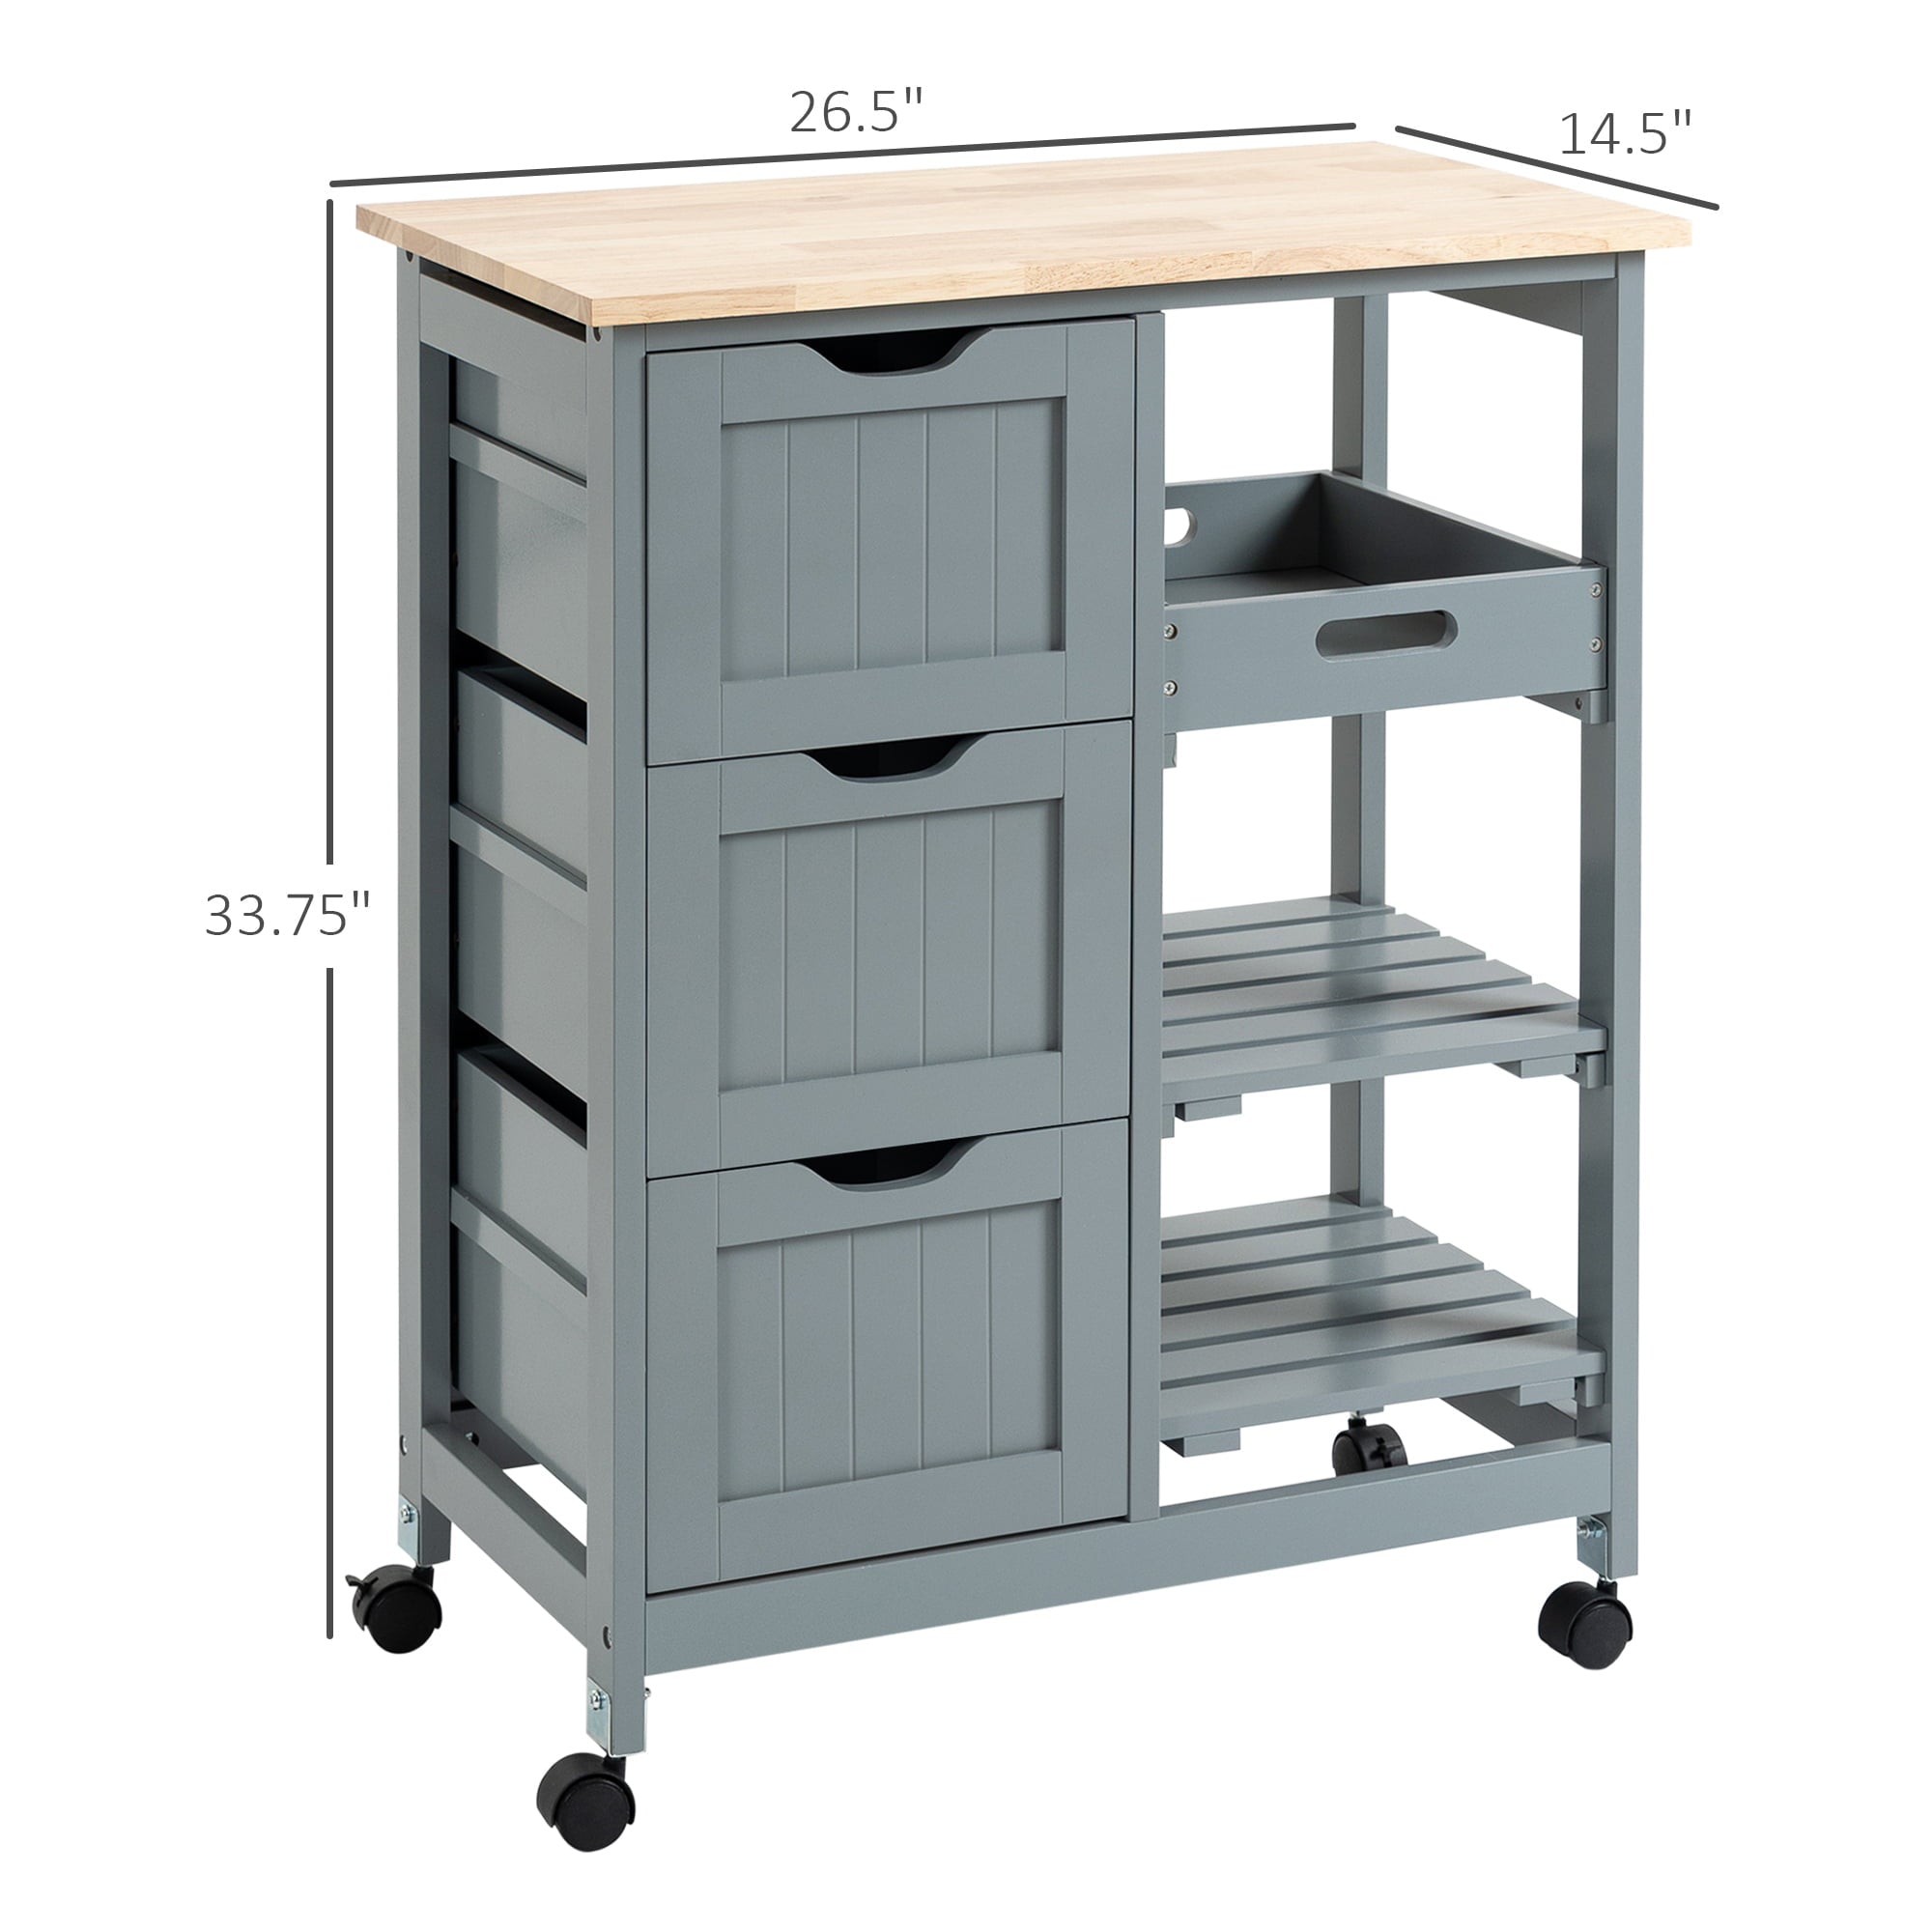 HomCom Rolling Kitchen Island Cart， Bar Serving Cart， Compact Trolley on Wheels with Wood Top， Shelves and Drawers for Home Dining Area， Gray